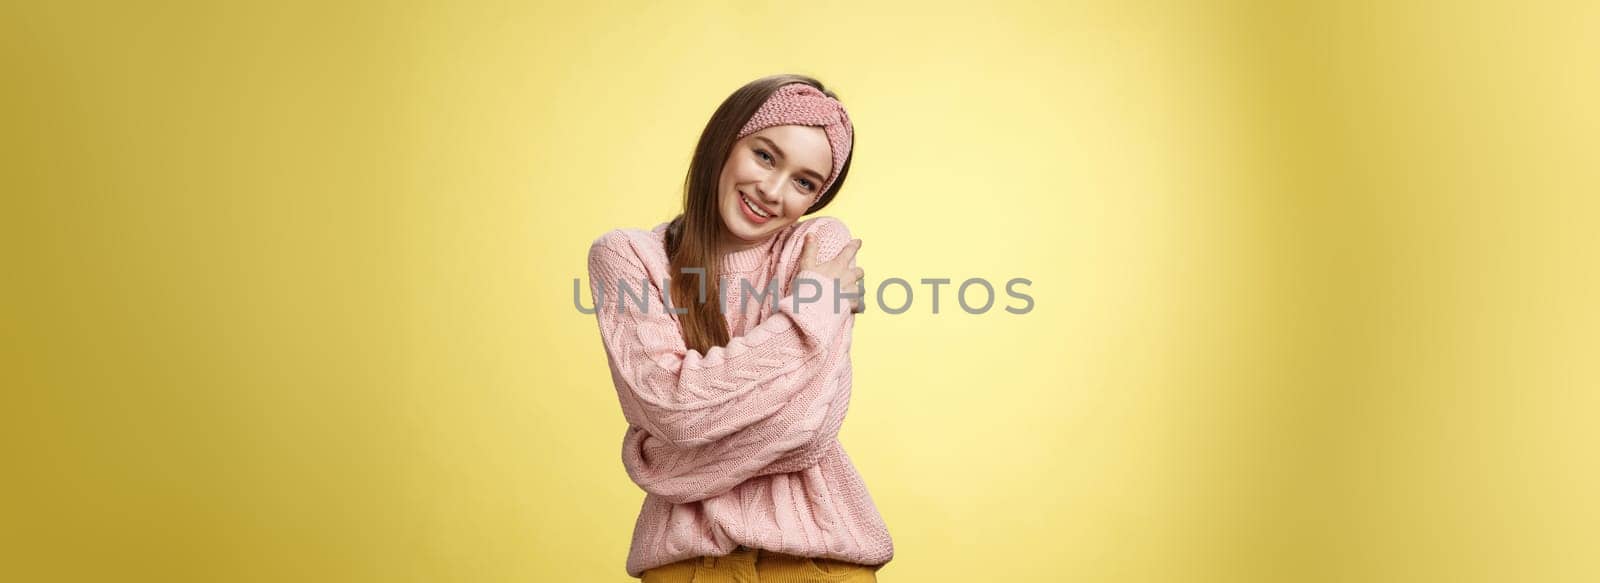 Girl feeling warm and safe thanks charming boyfriend embracing herself romantically hugging leaning on shoulder enjoying warmth of fluffy sweater, smiling tender in love over yellow background.